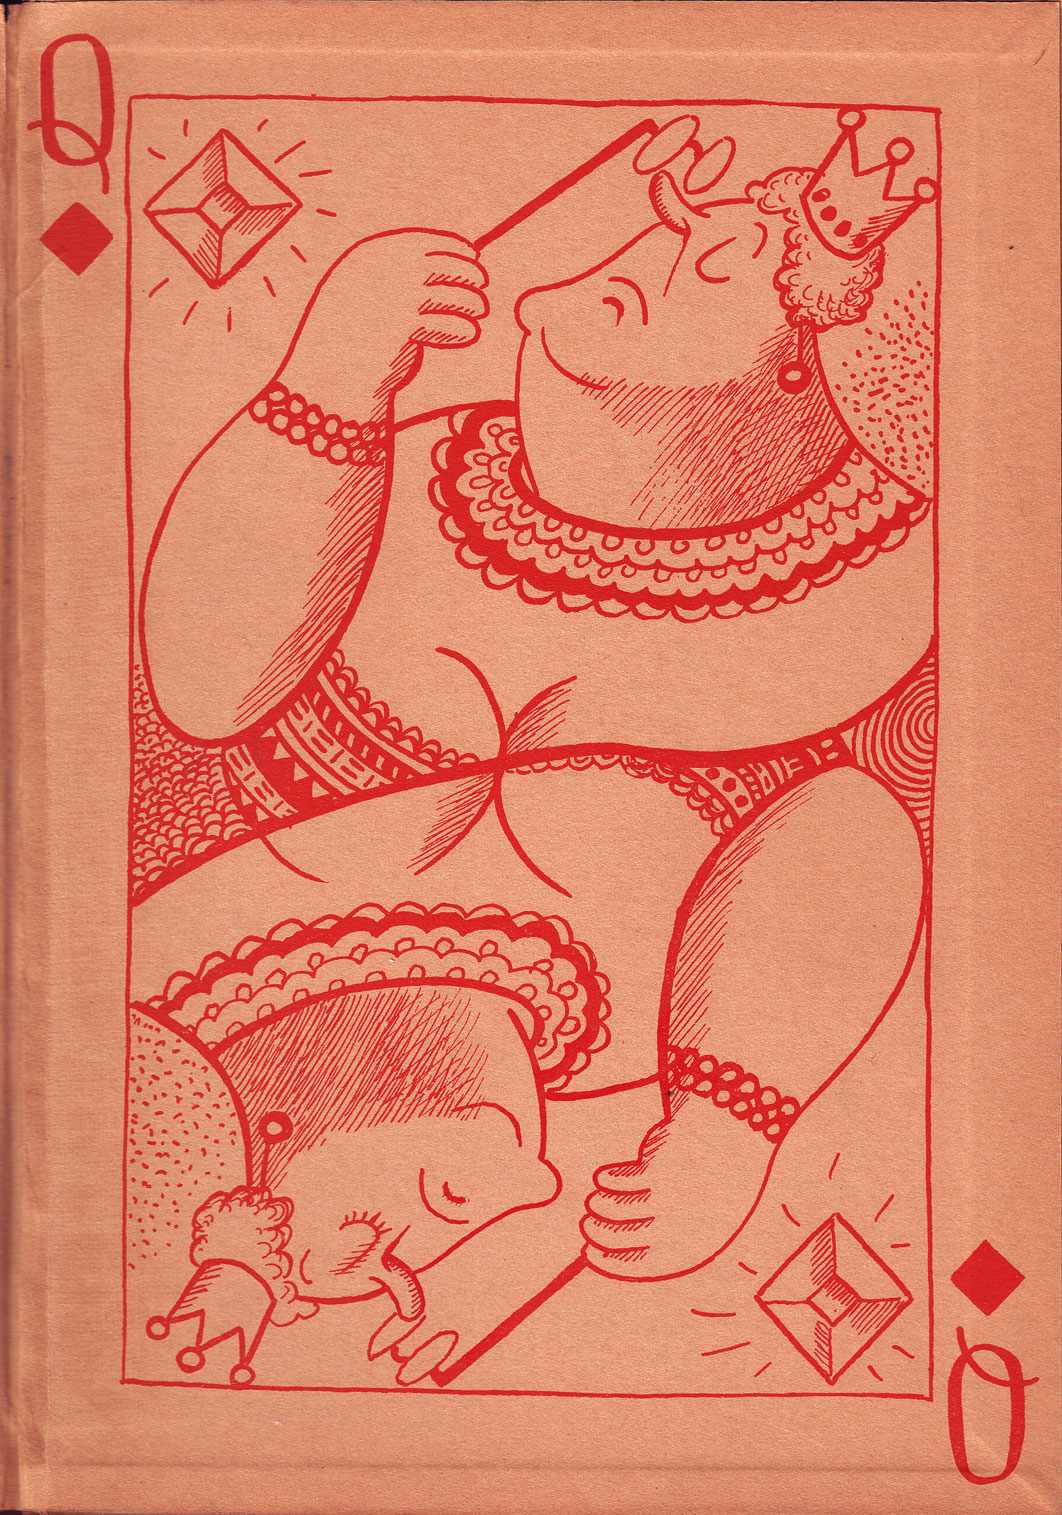 Redfield's Ruling Clawss (1935): right endpaper